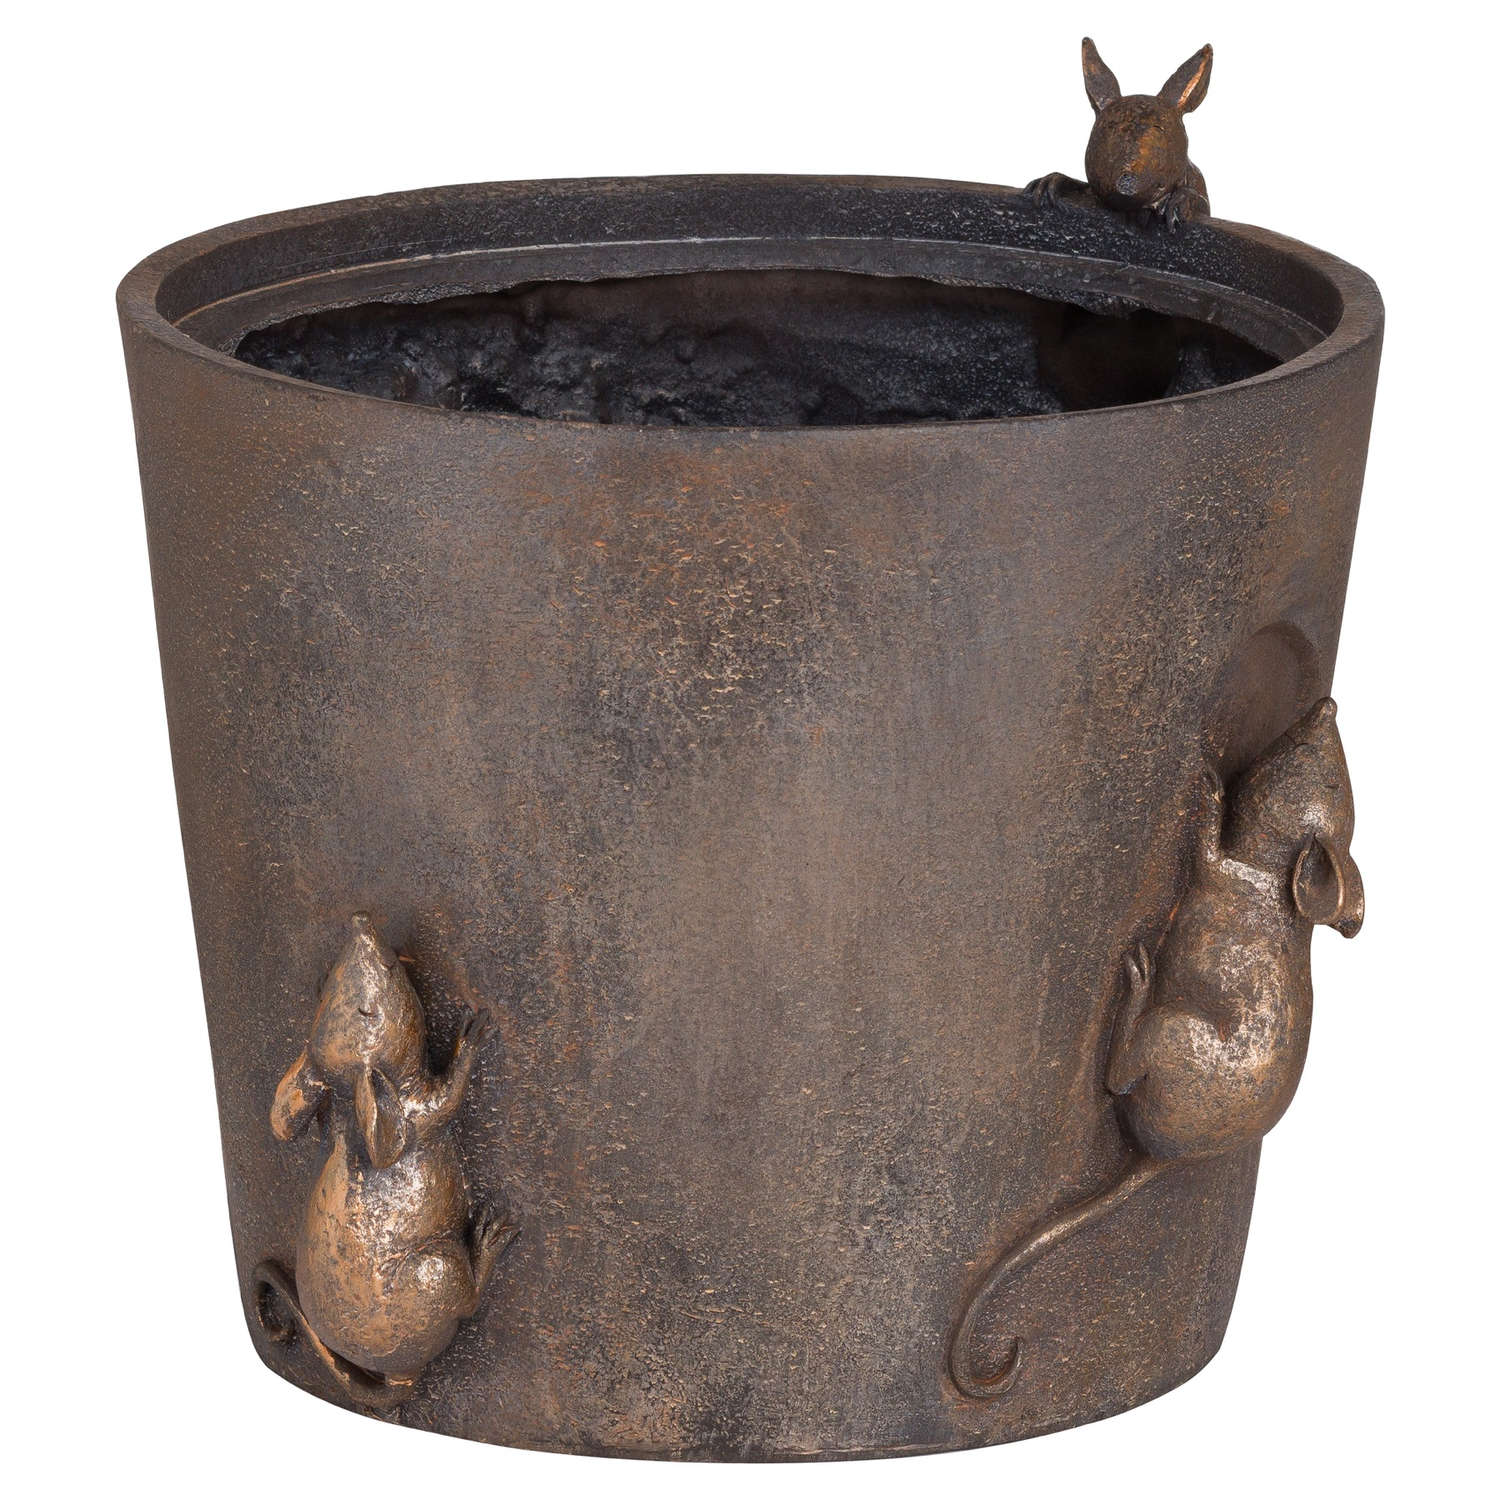 Flower Pot With Mice Detail - Image 1